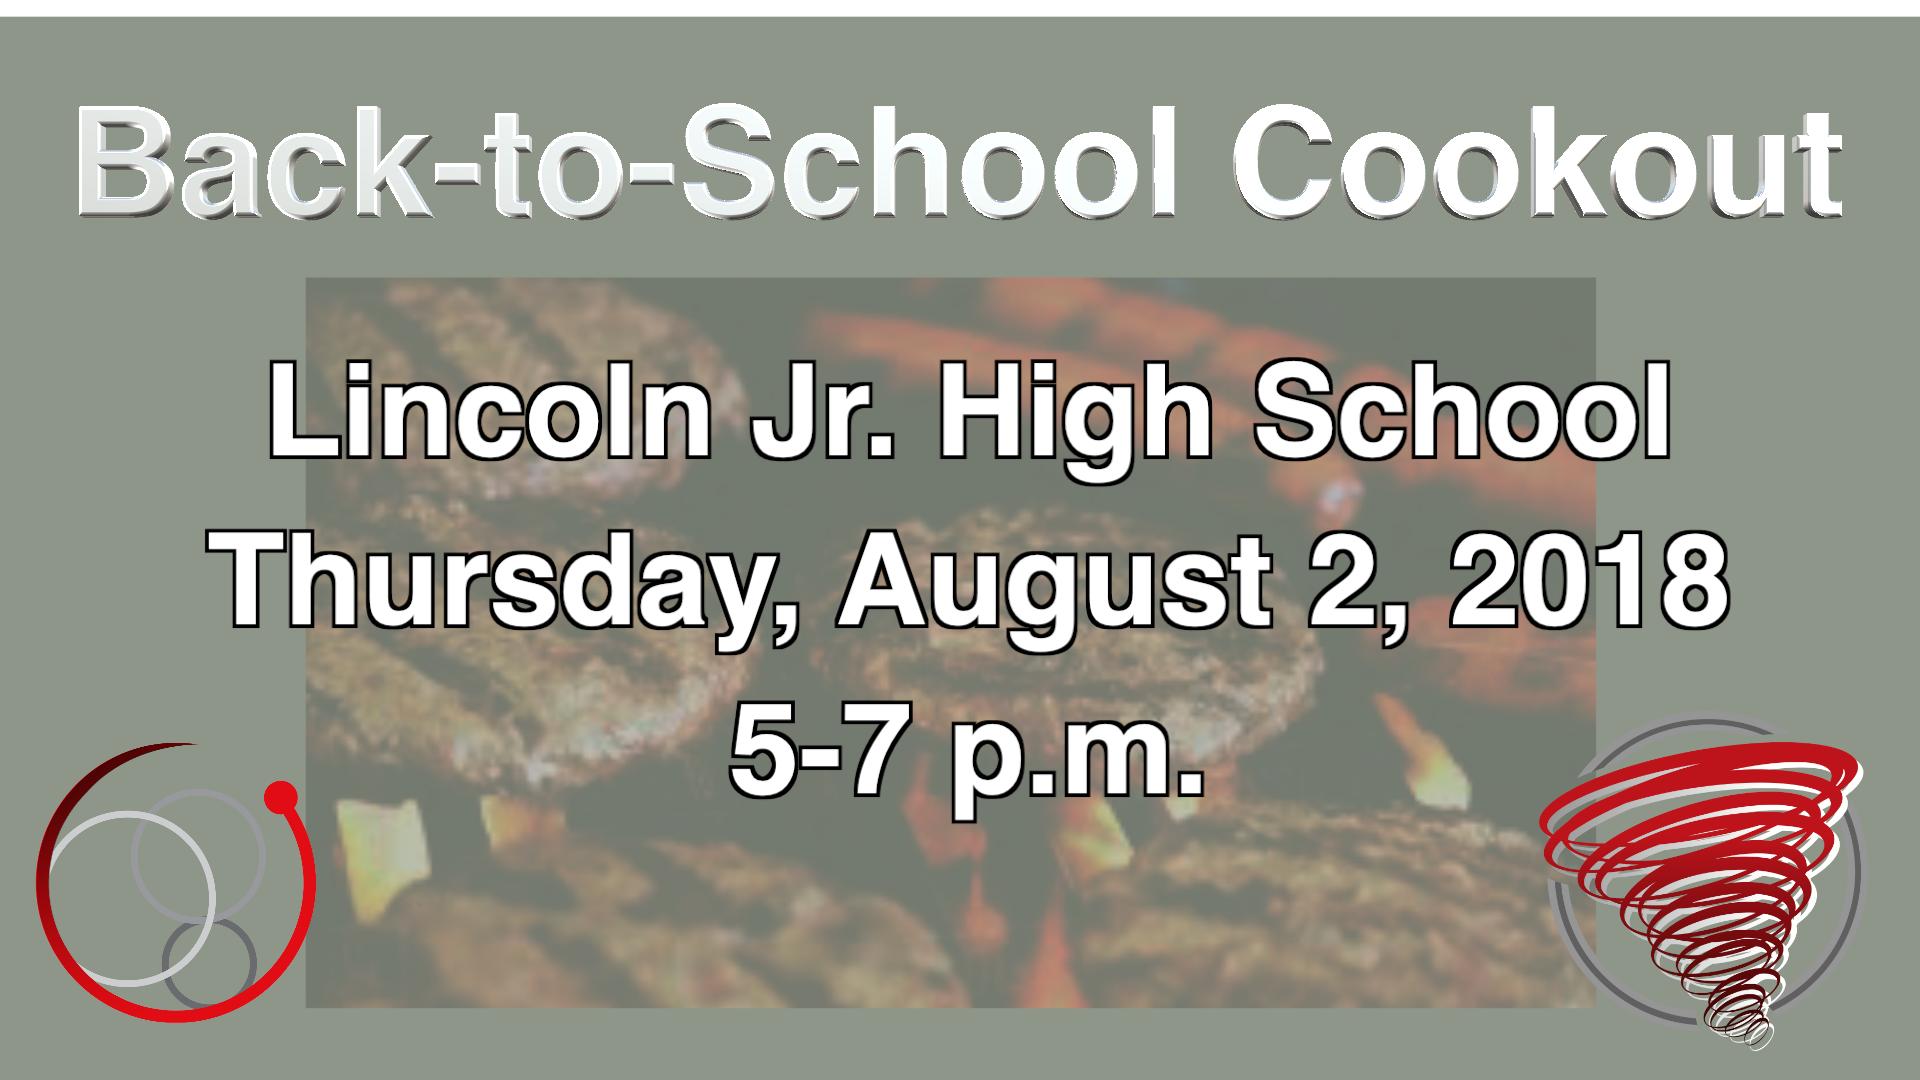 Back-to-School Cookout Lincoln Jr. High School Thursday, August 2, 2018 5-7 p.m. Innovation logo and red storm logo